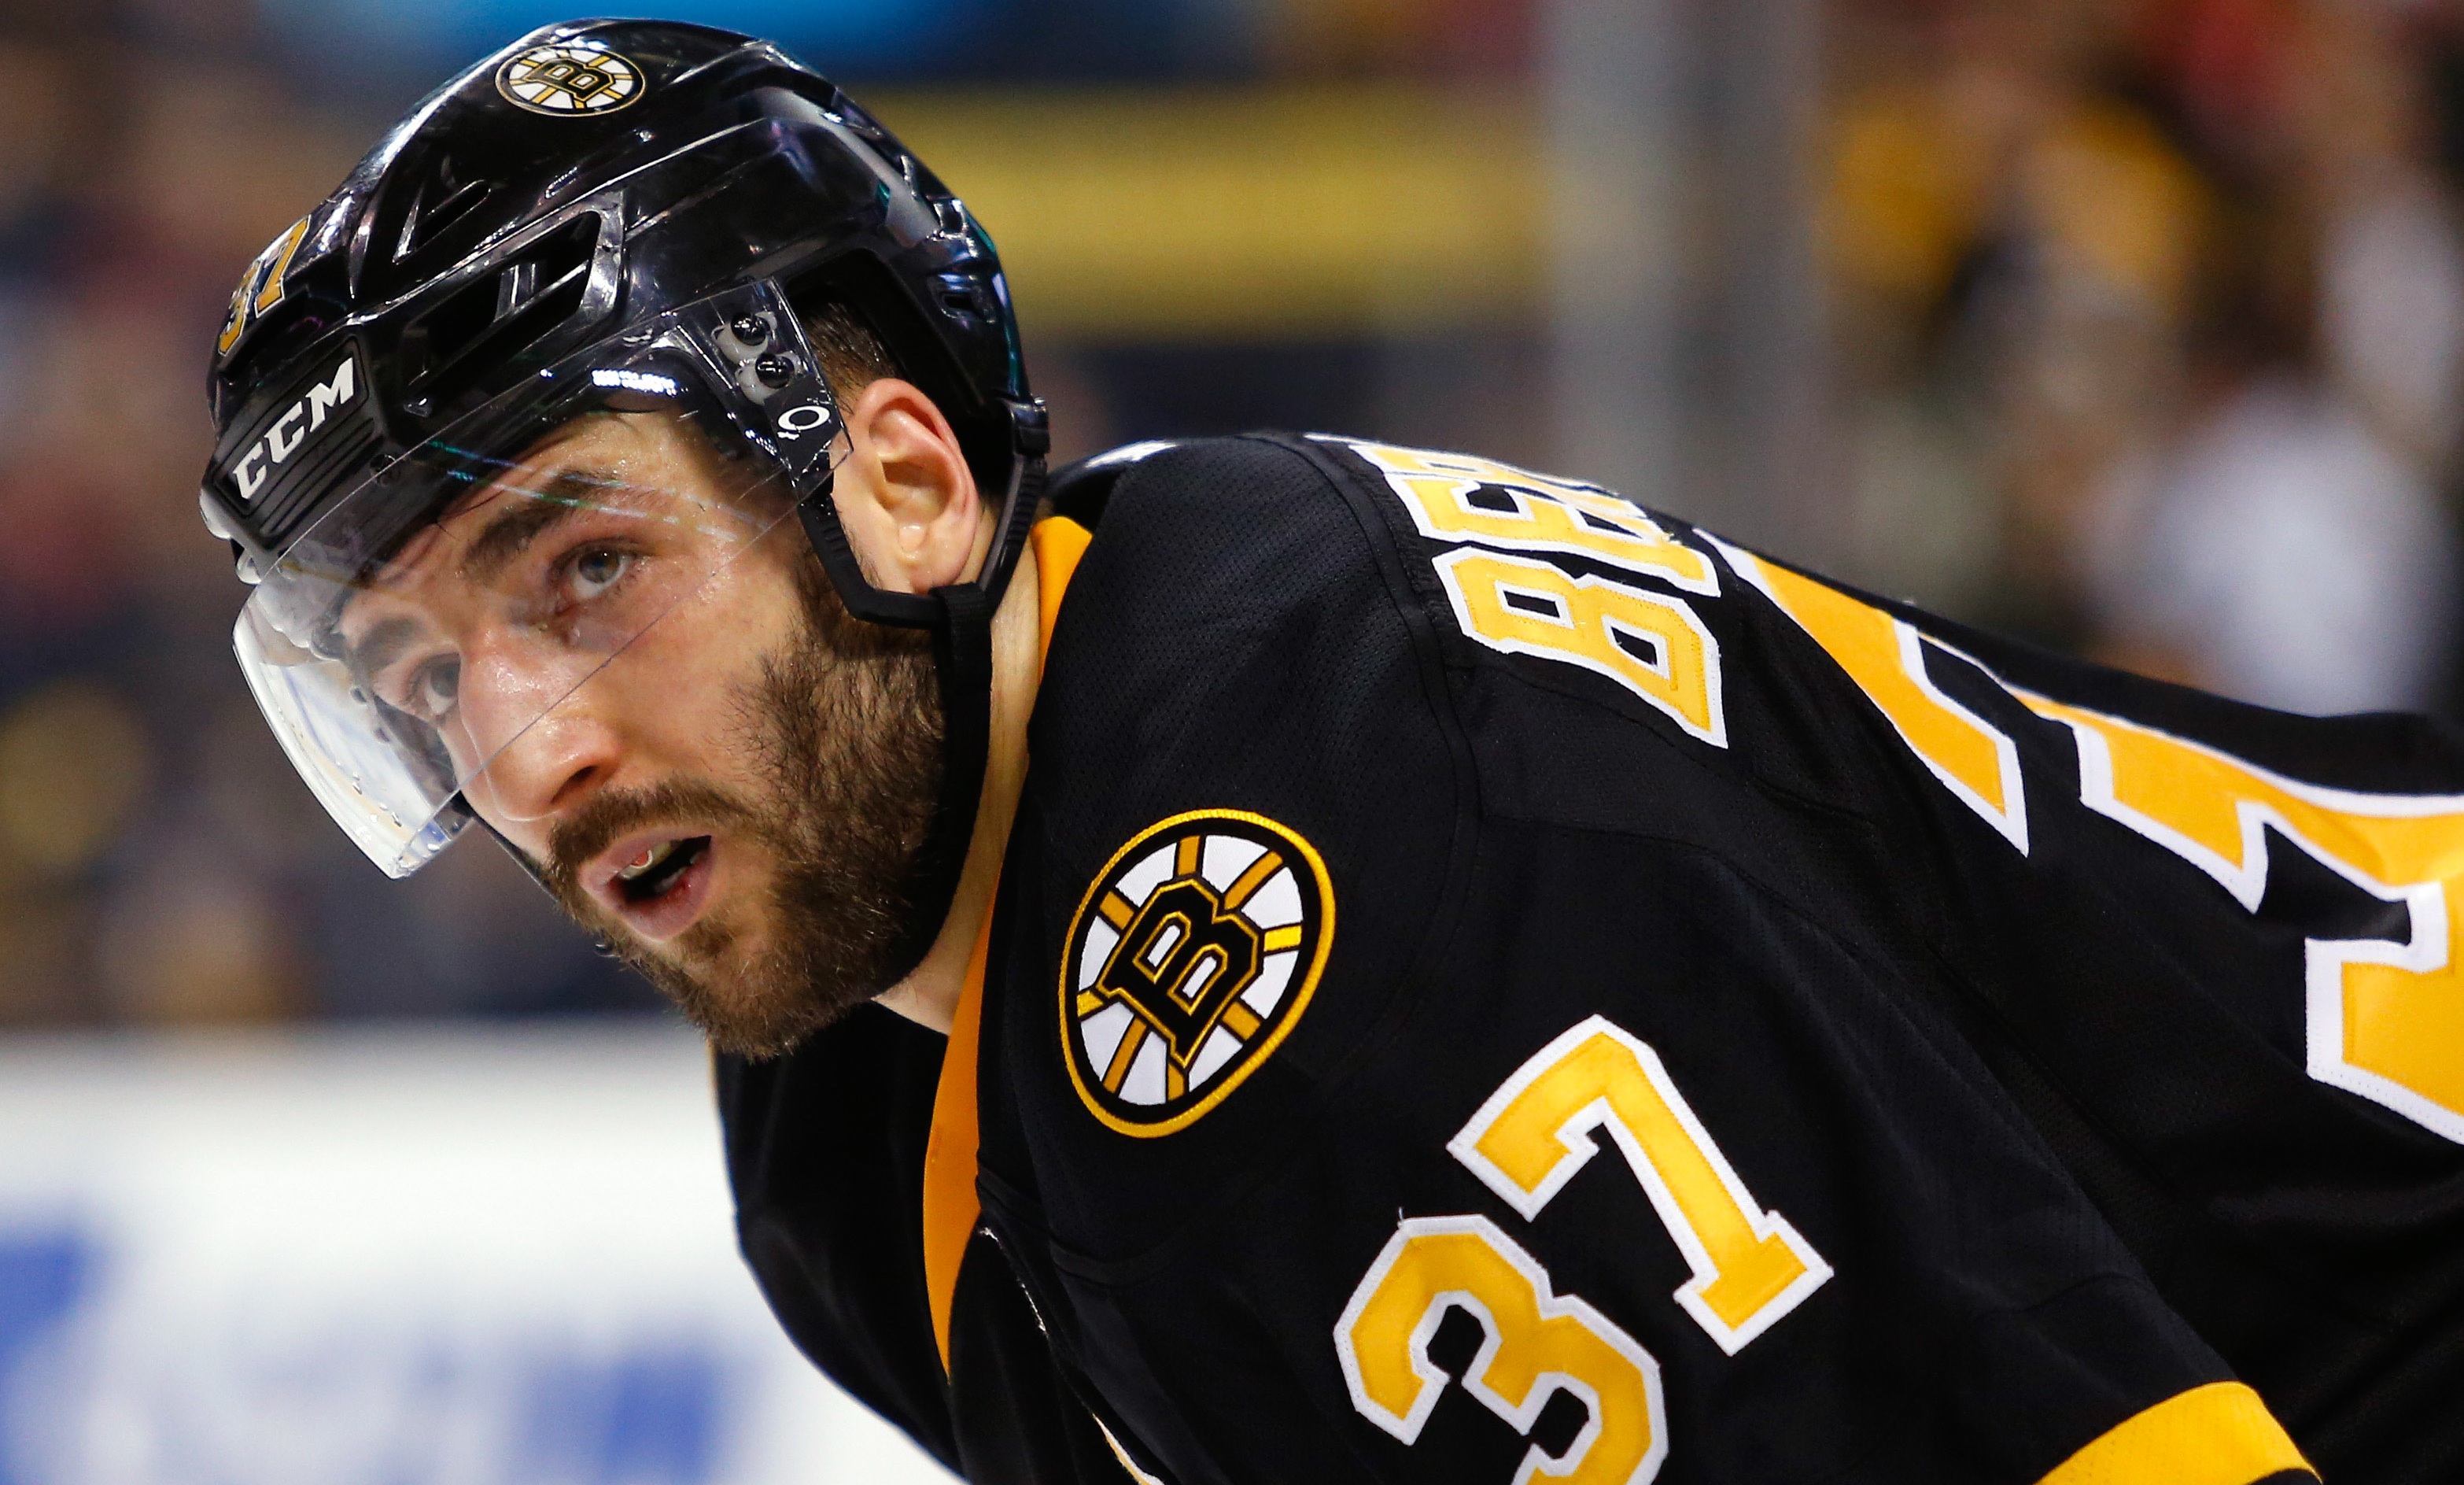 A return for Patrice Bergeron next week viewed as a possibility